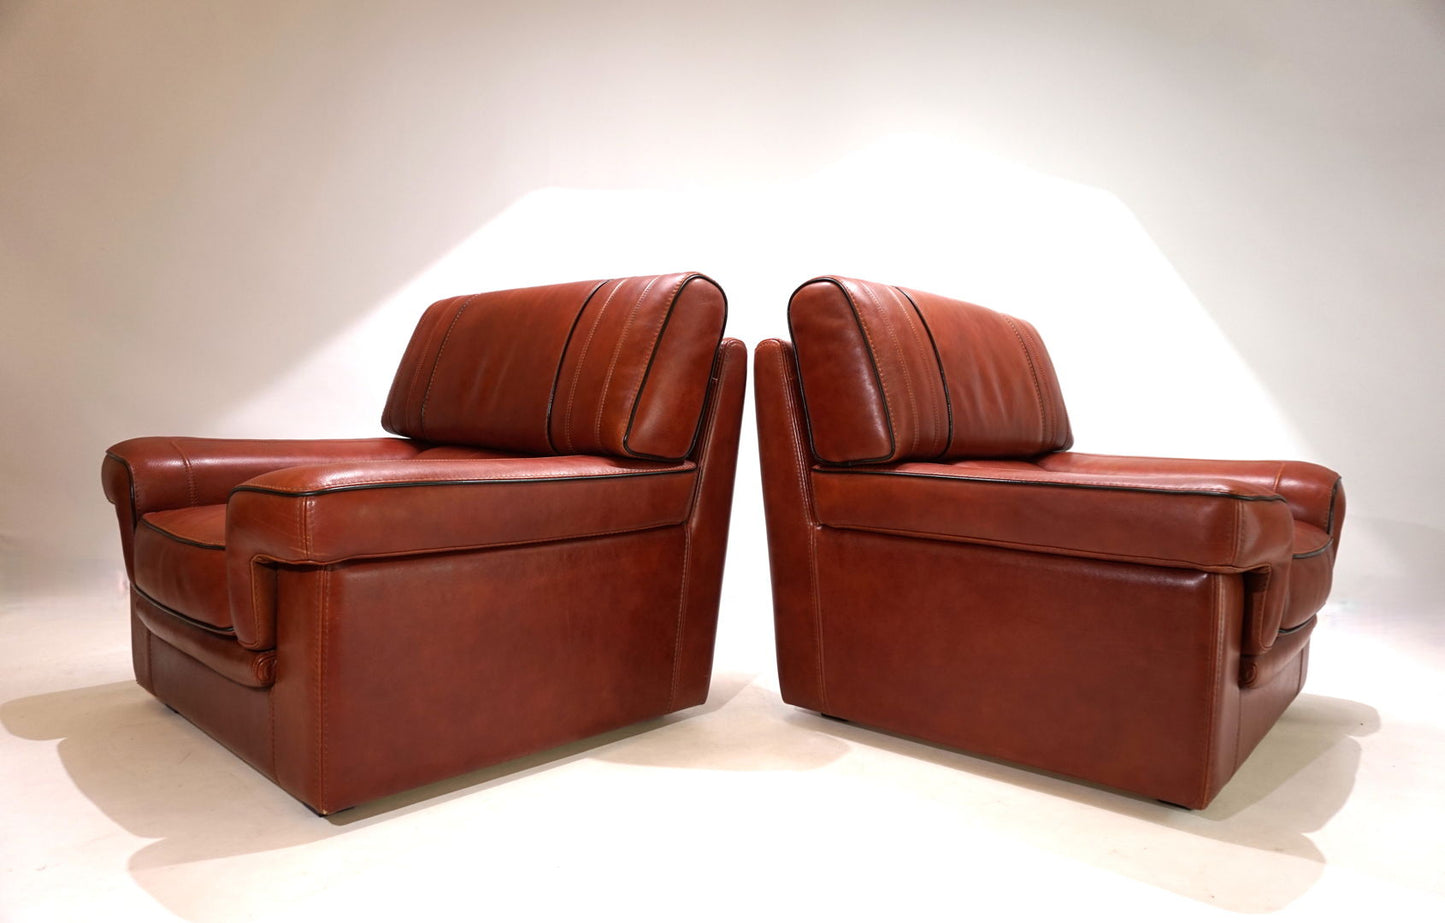 Set of 2 leather armchairs, cognac coloured, 1990